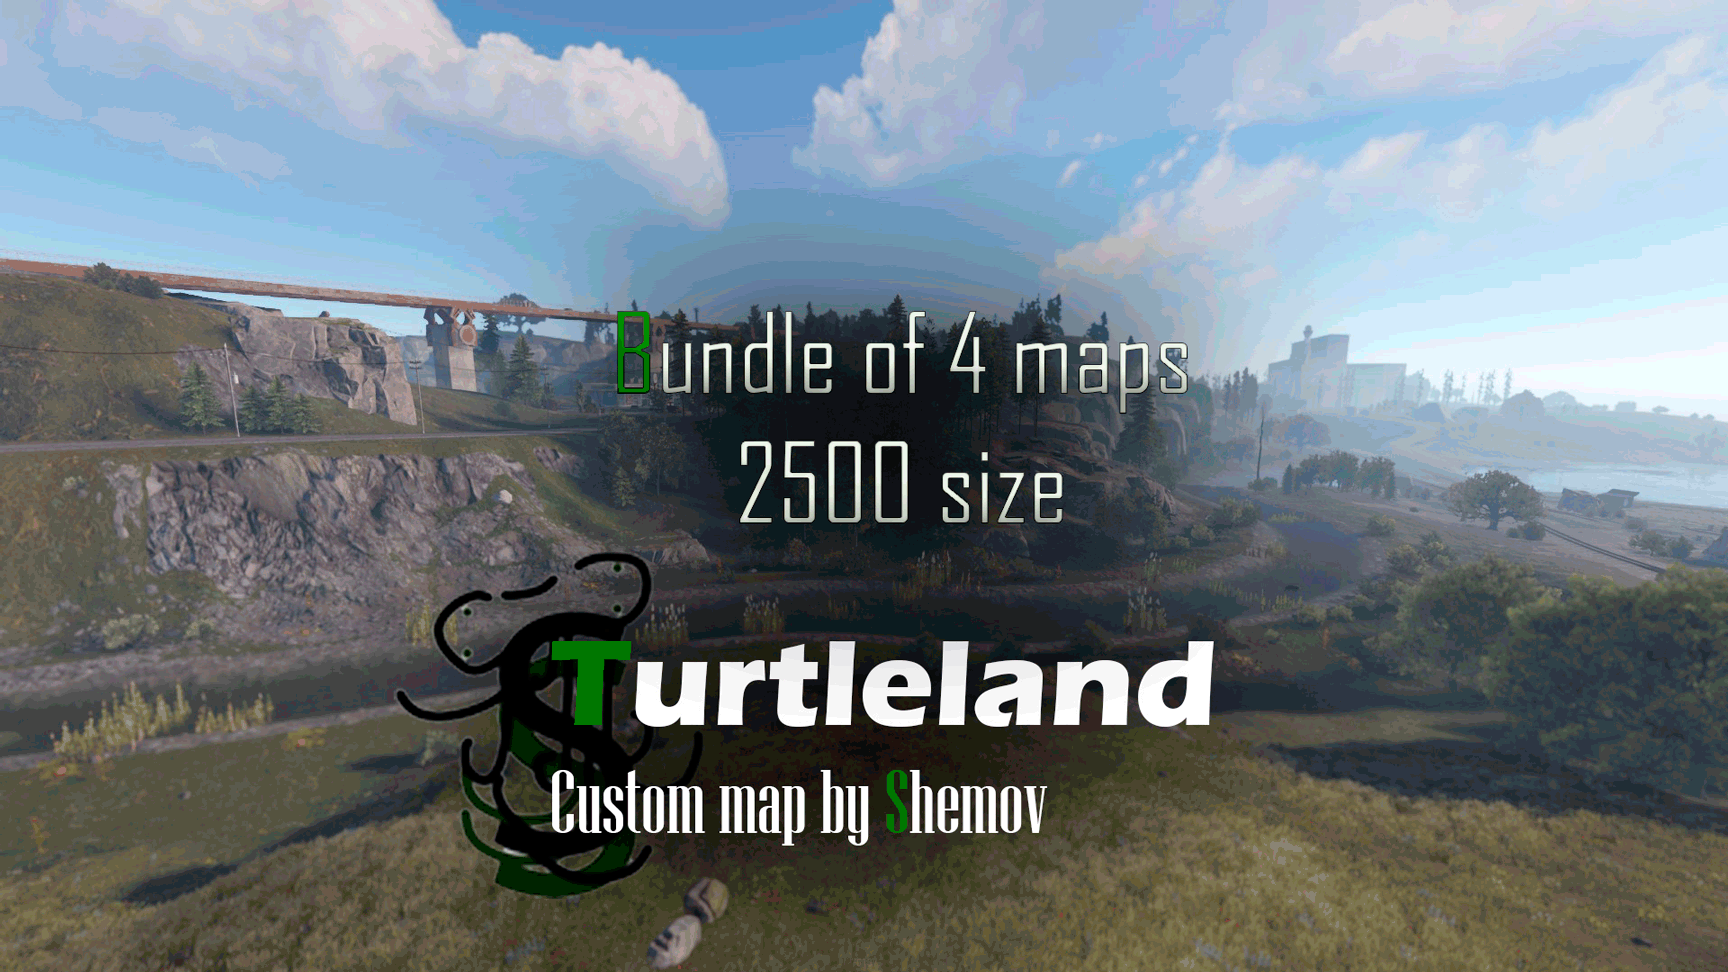 More information about "Bundle of 4 maps | 2500 size"